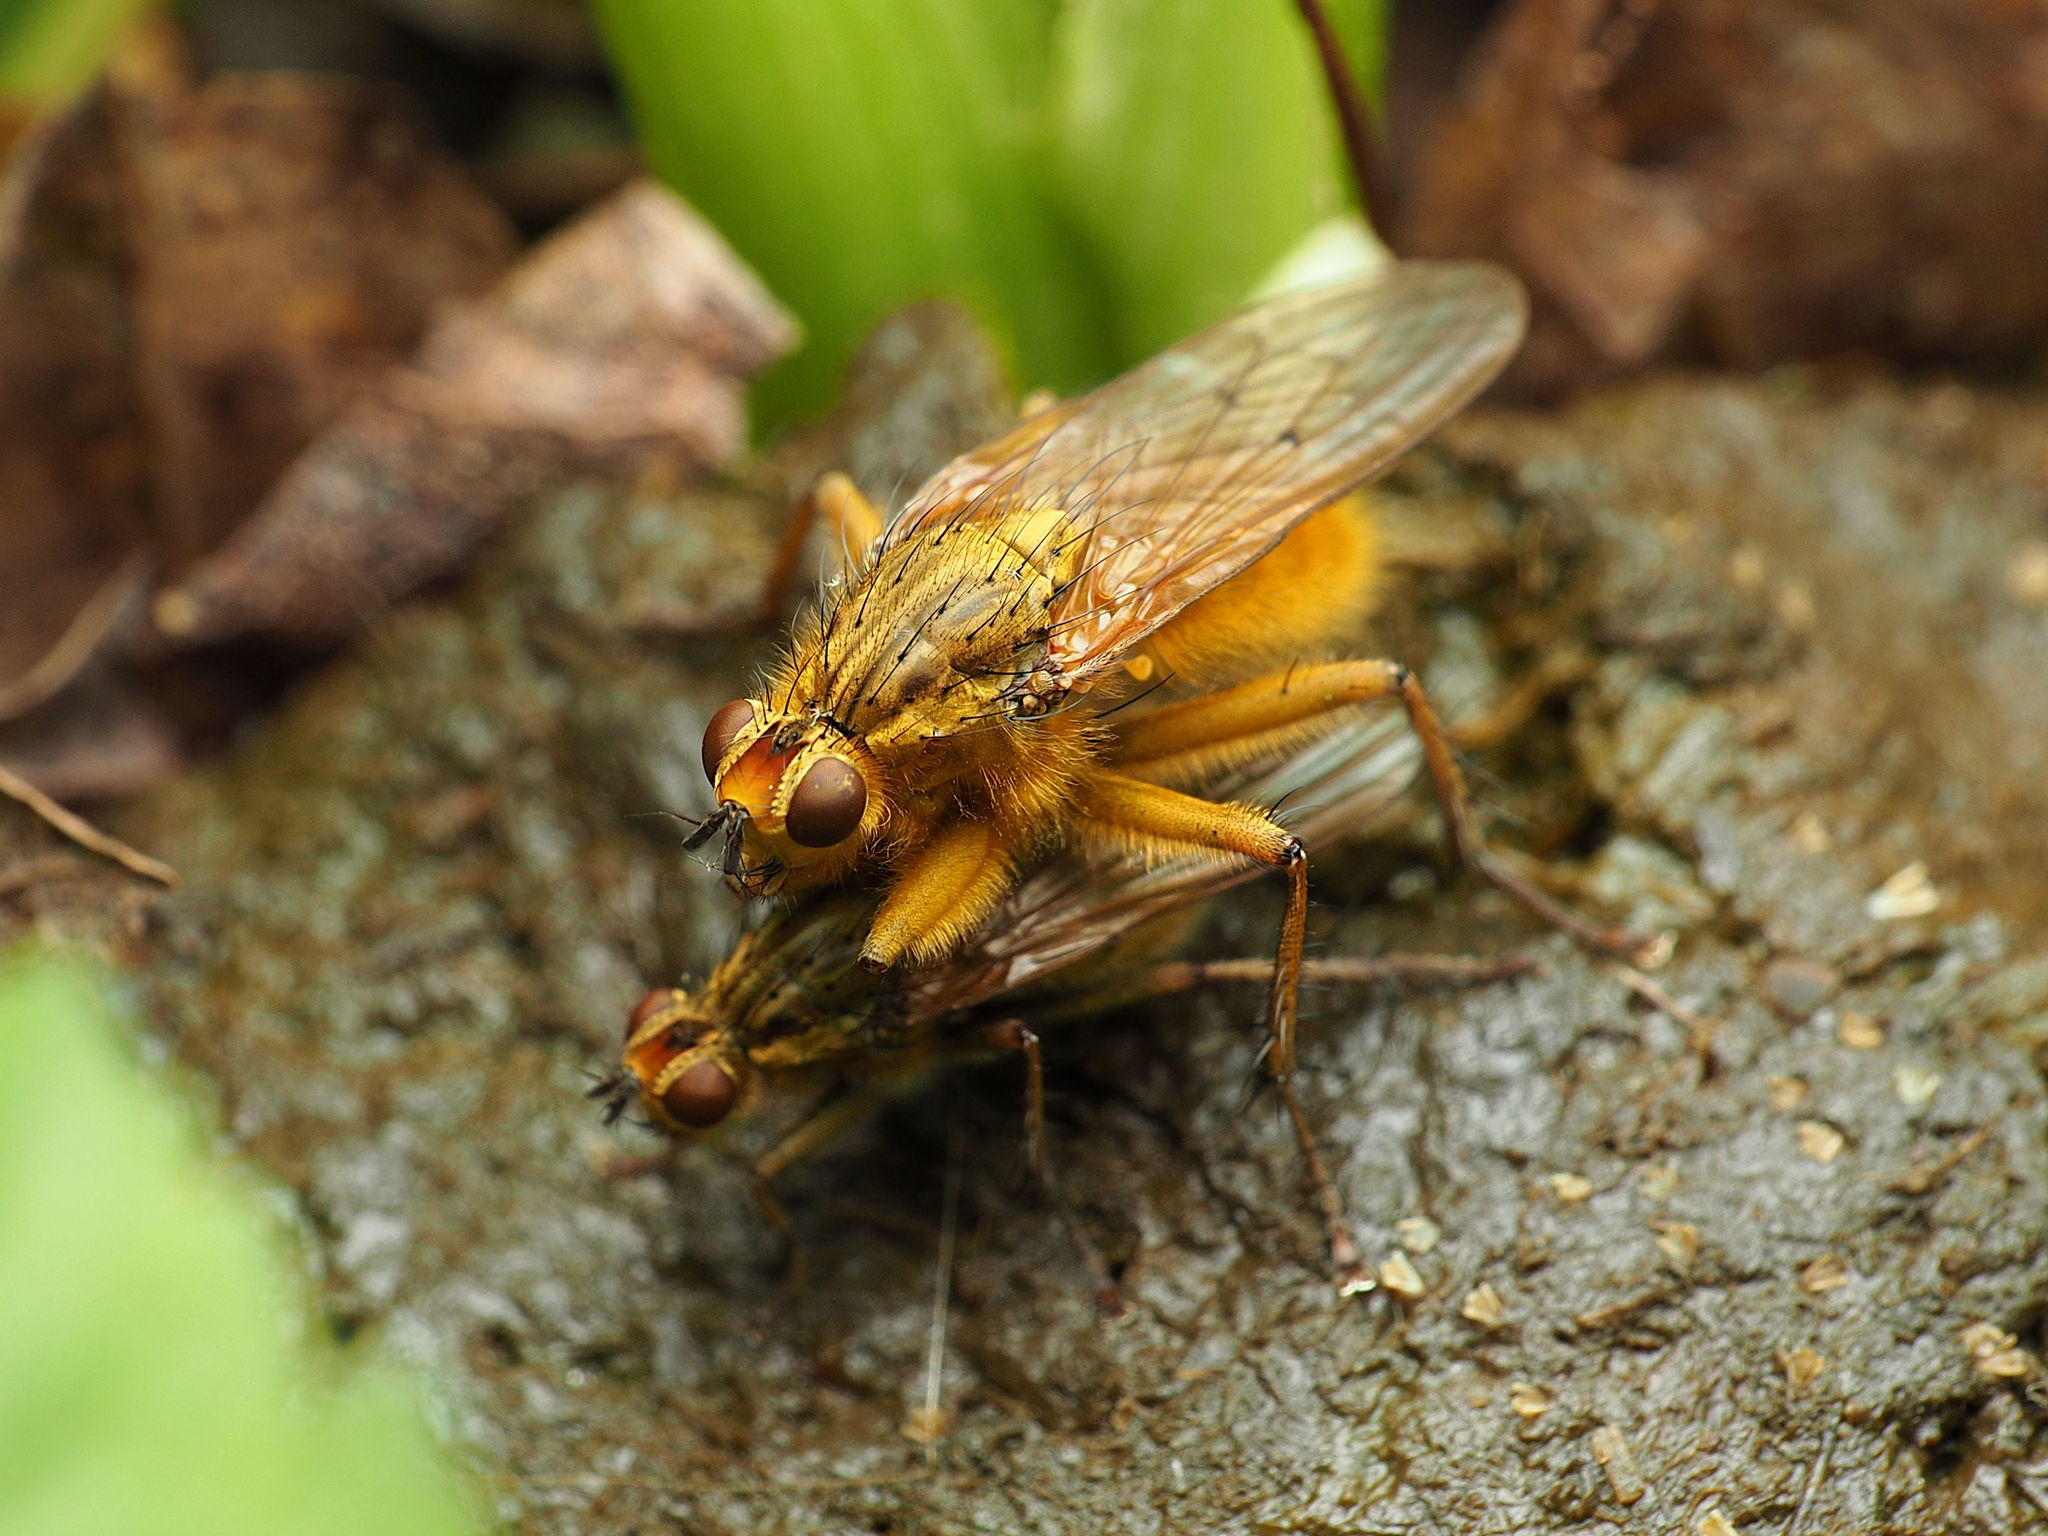 Maryland Biodiversity Project - Golden Dung Fly (Scathophaga stercoraria)